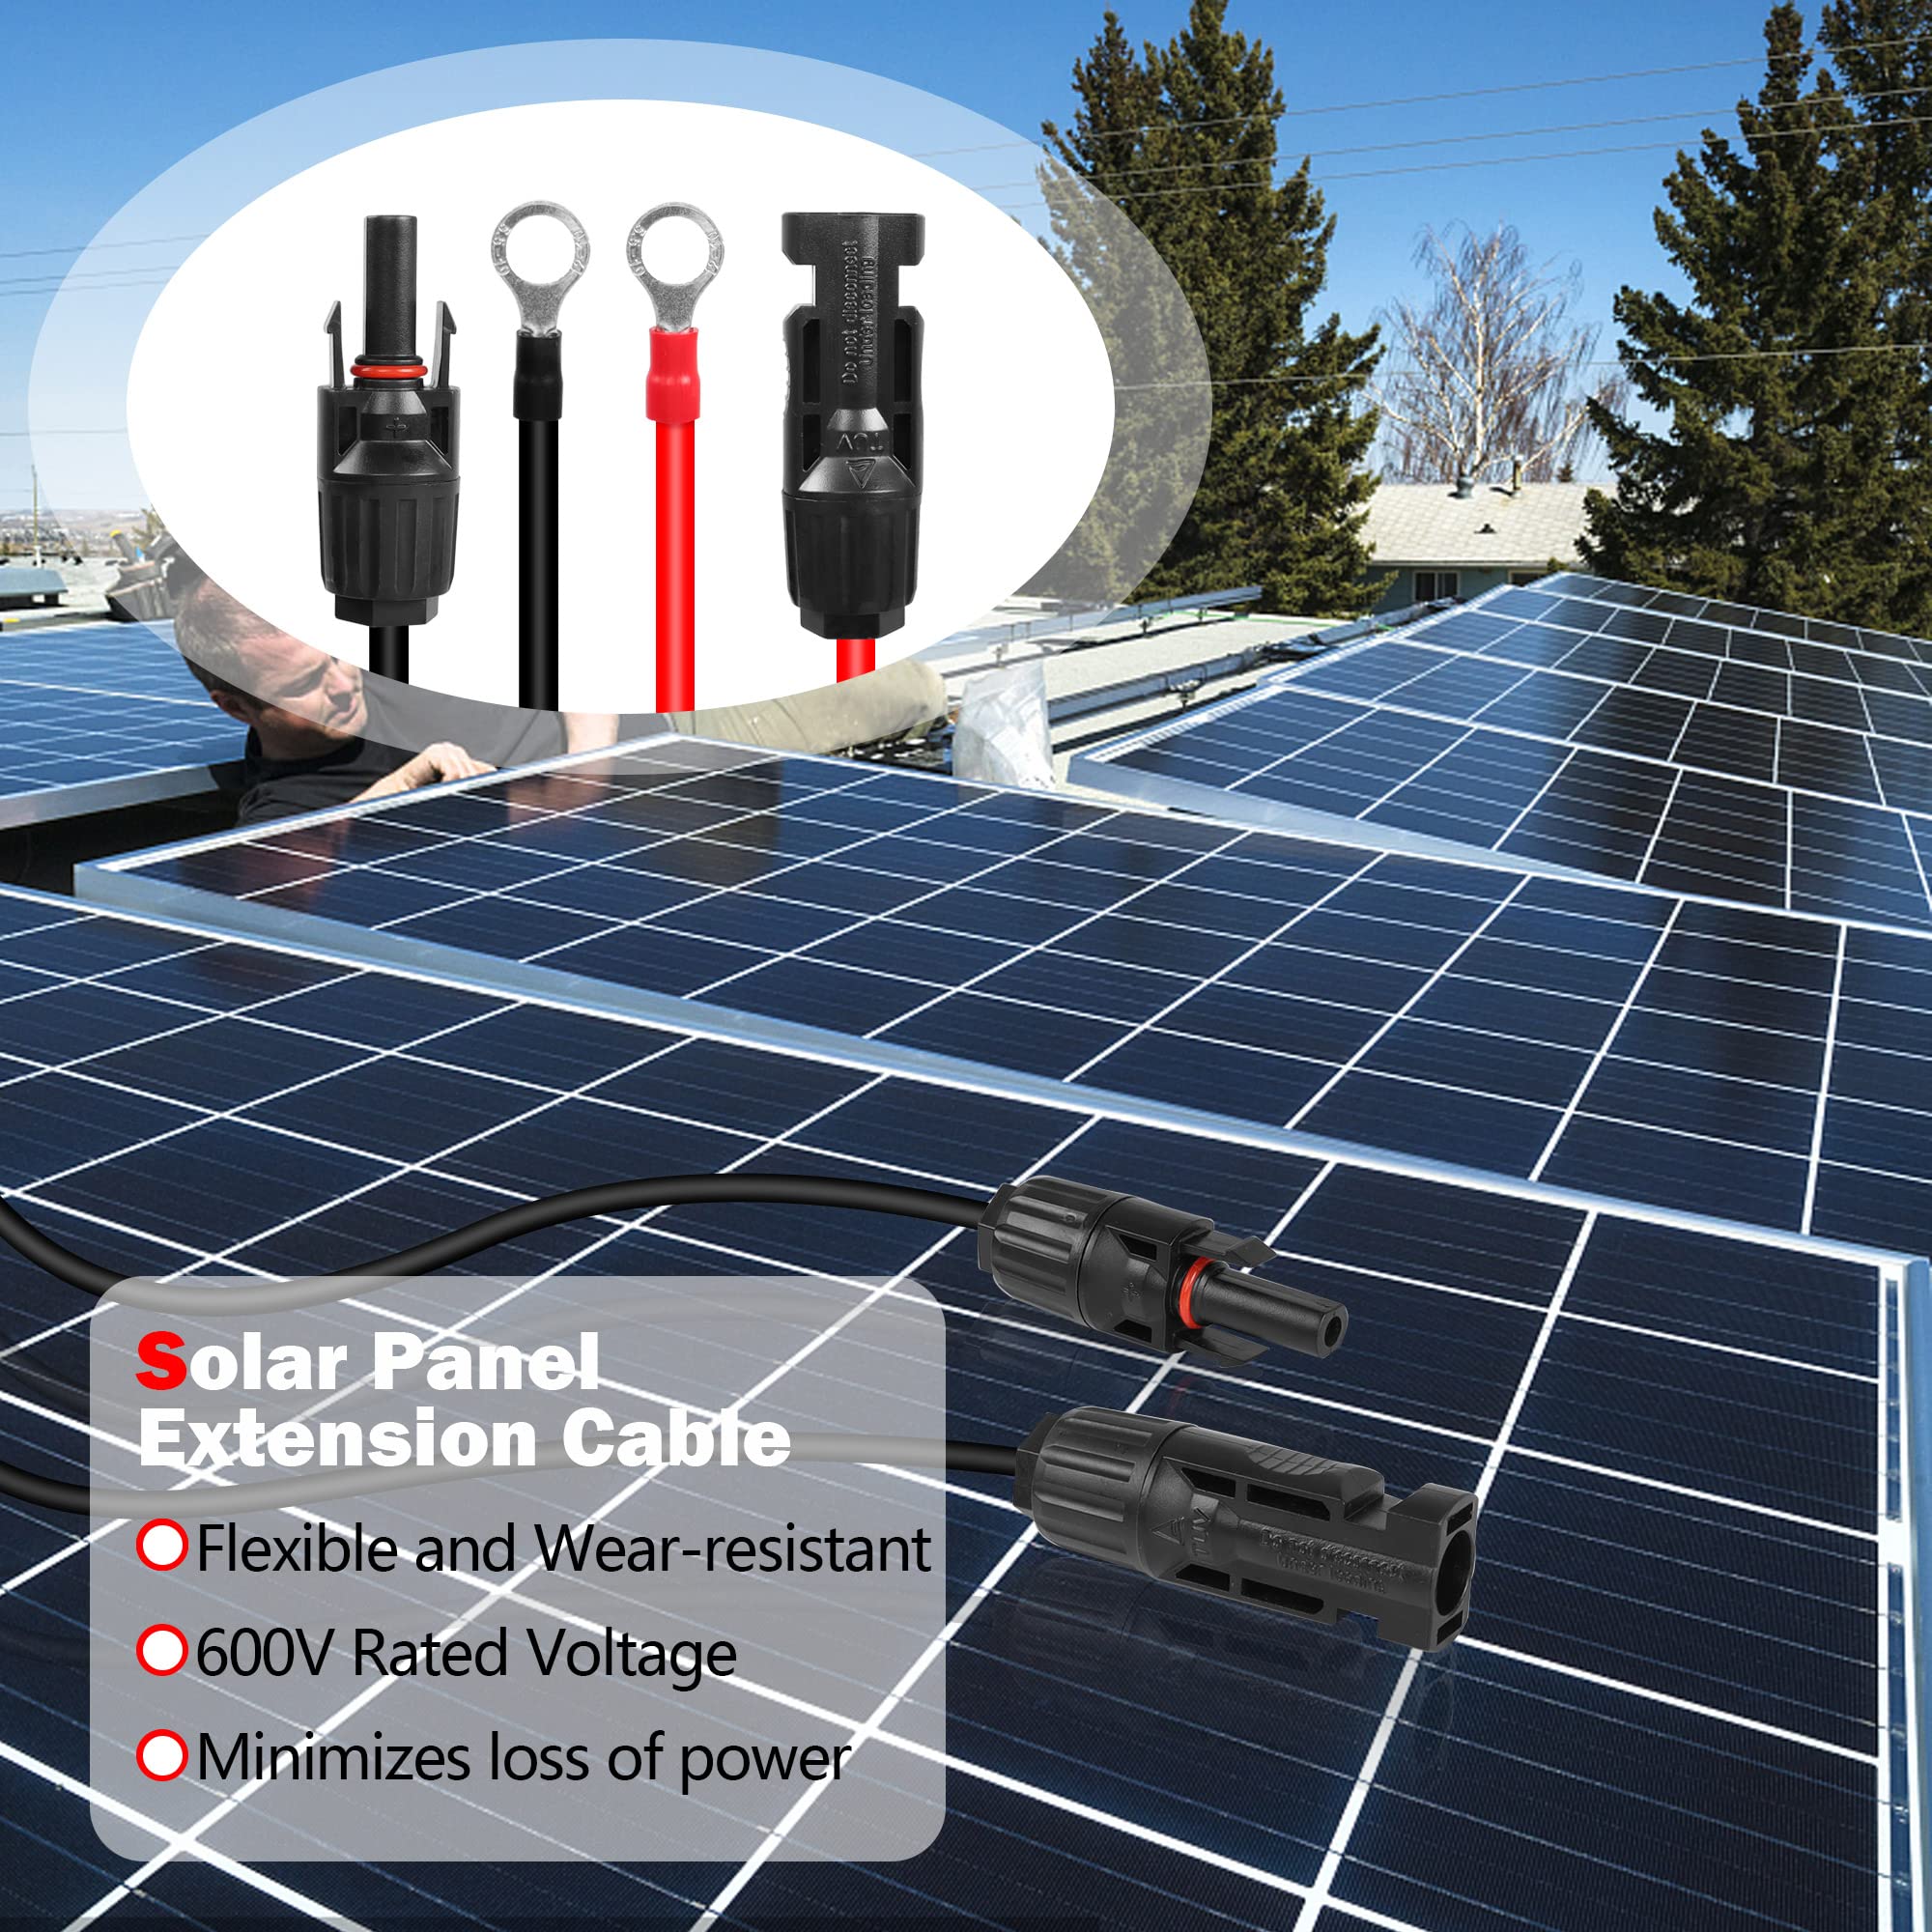 GELRHONR 14AWG Solar Panel Extension Bare Wire with Female and Male Connector Solar Panel Wiring Pigtail Cable Adapter for Solar Panels-(Red+Black) (14AWG 5M/16FT M/F)